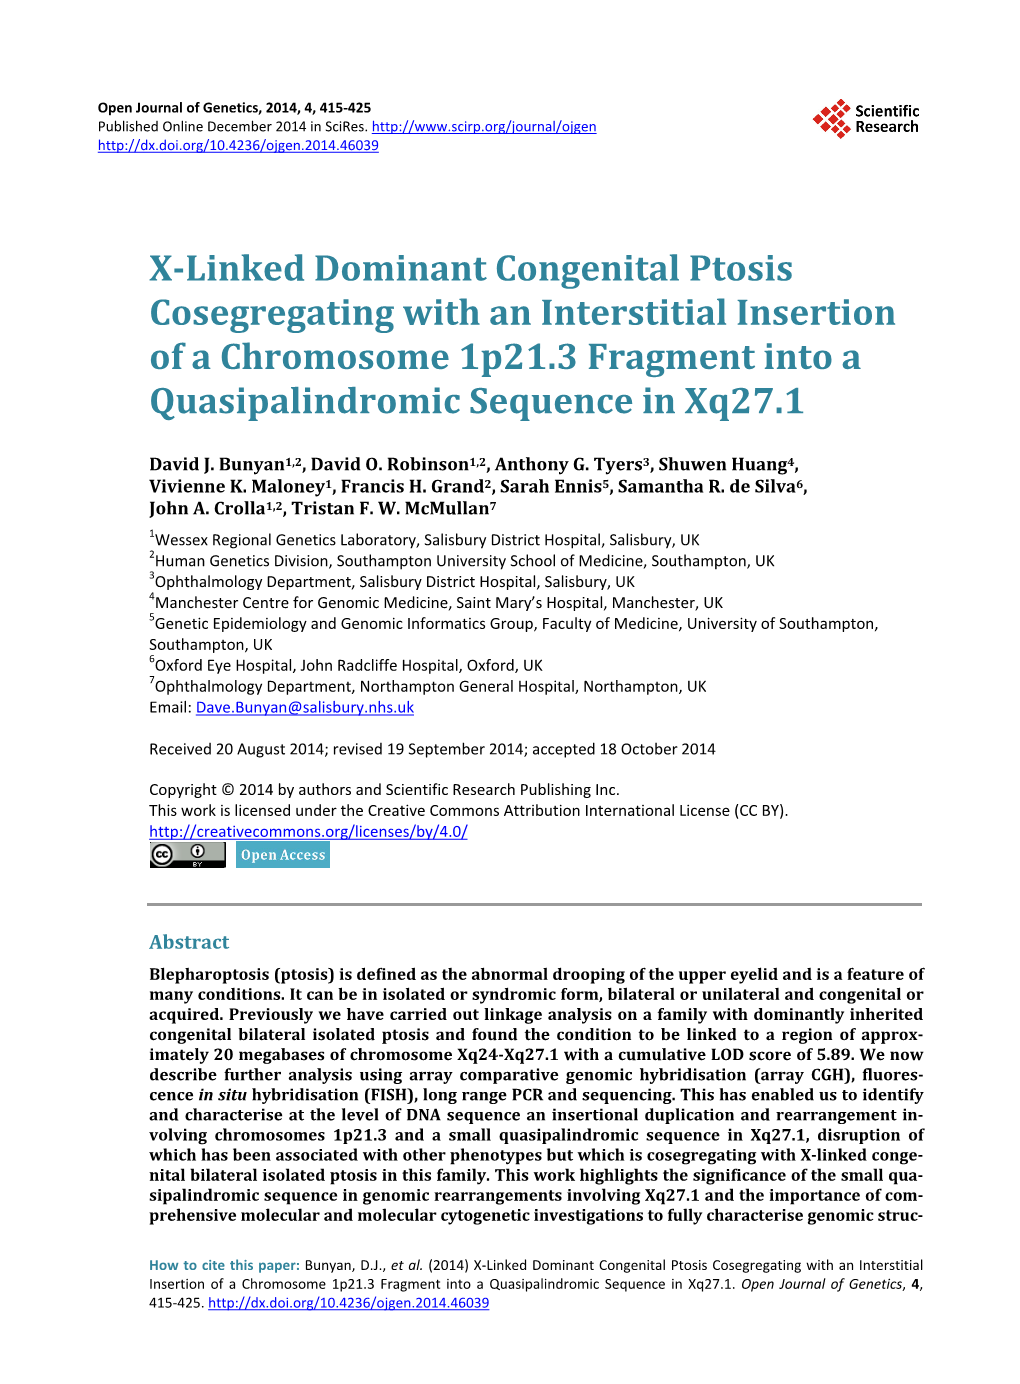 X-Linked Dominant Congenital Ptosis Cosegregating with an Interstitial Insertion of a Chromosome 1P21.3 Fragment Into a Quasipalindromic Sequence in Xq27.1